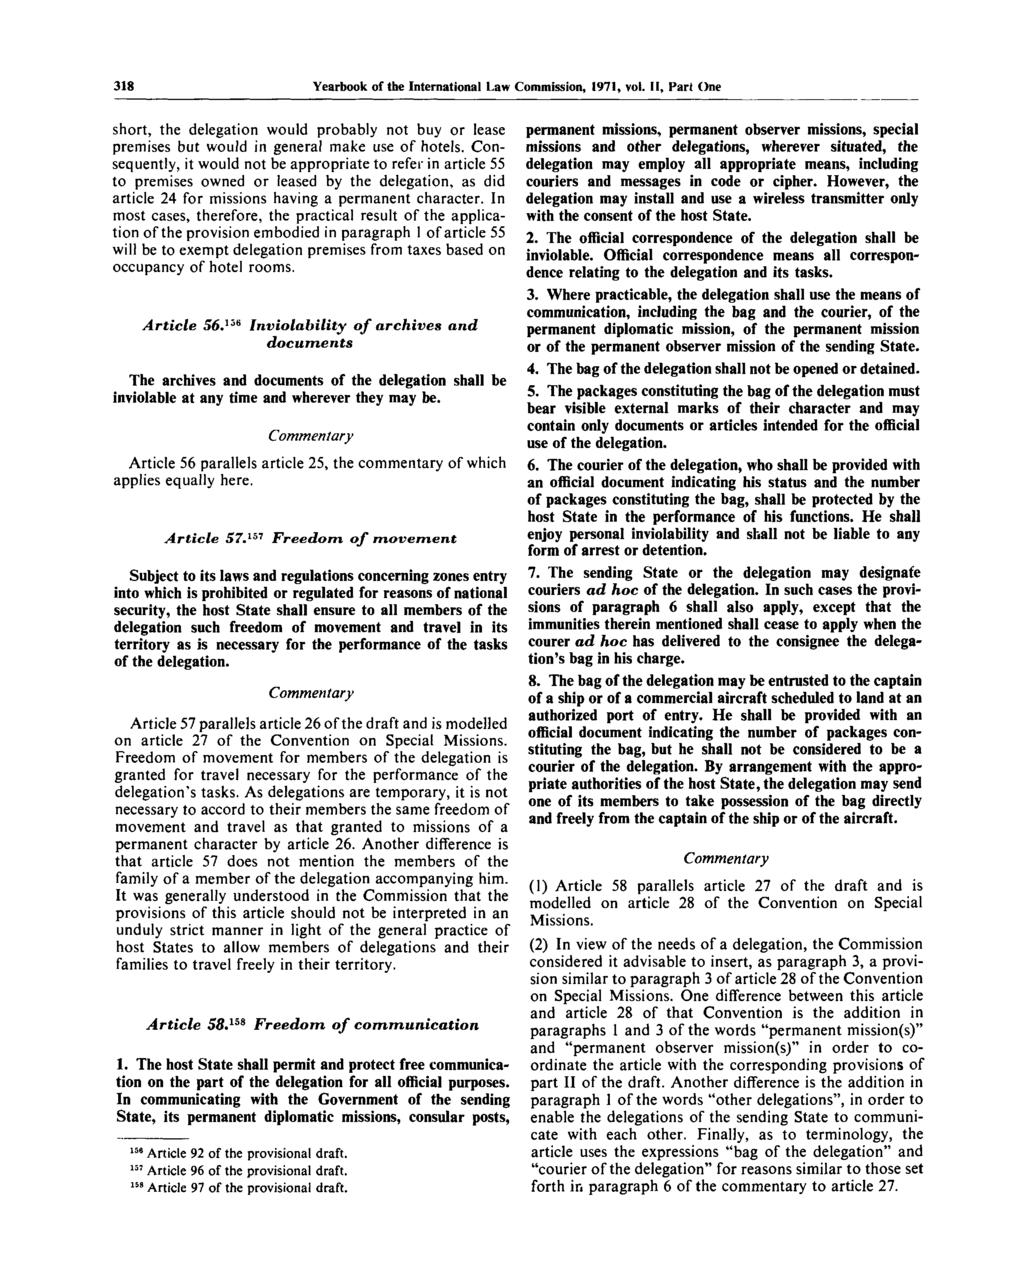 318 Yearbook of the International Law Commission, 1971, vol. II, Part One short, the delegation would probably not buy or lease premises but would in general make use of hotels.